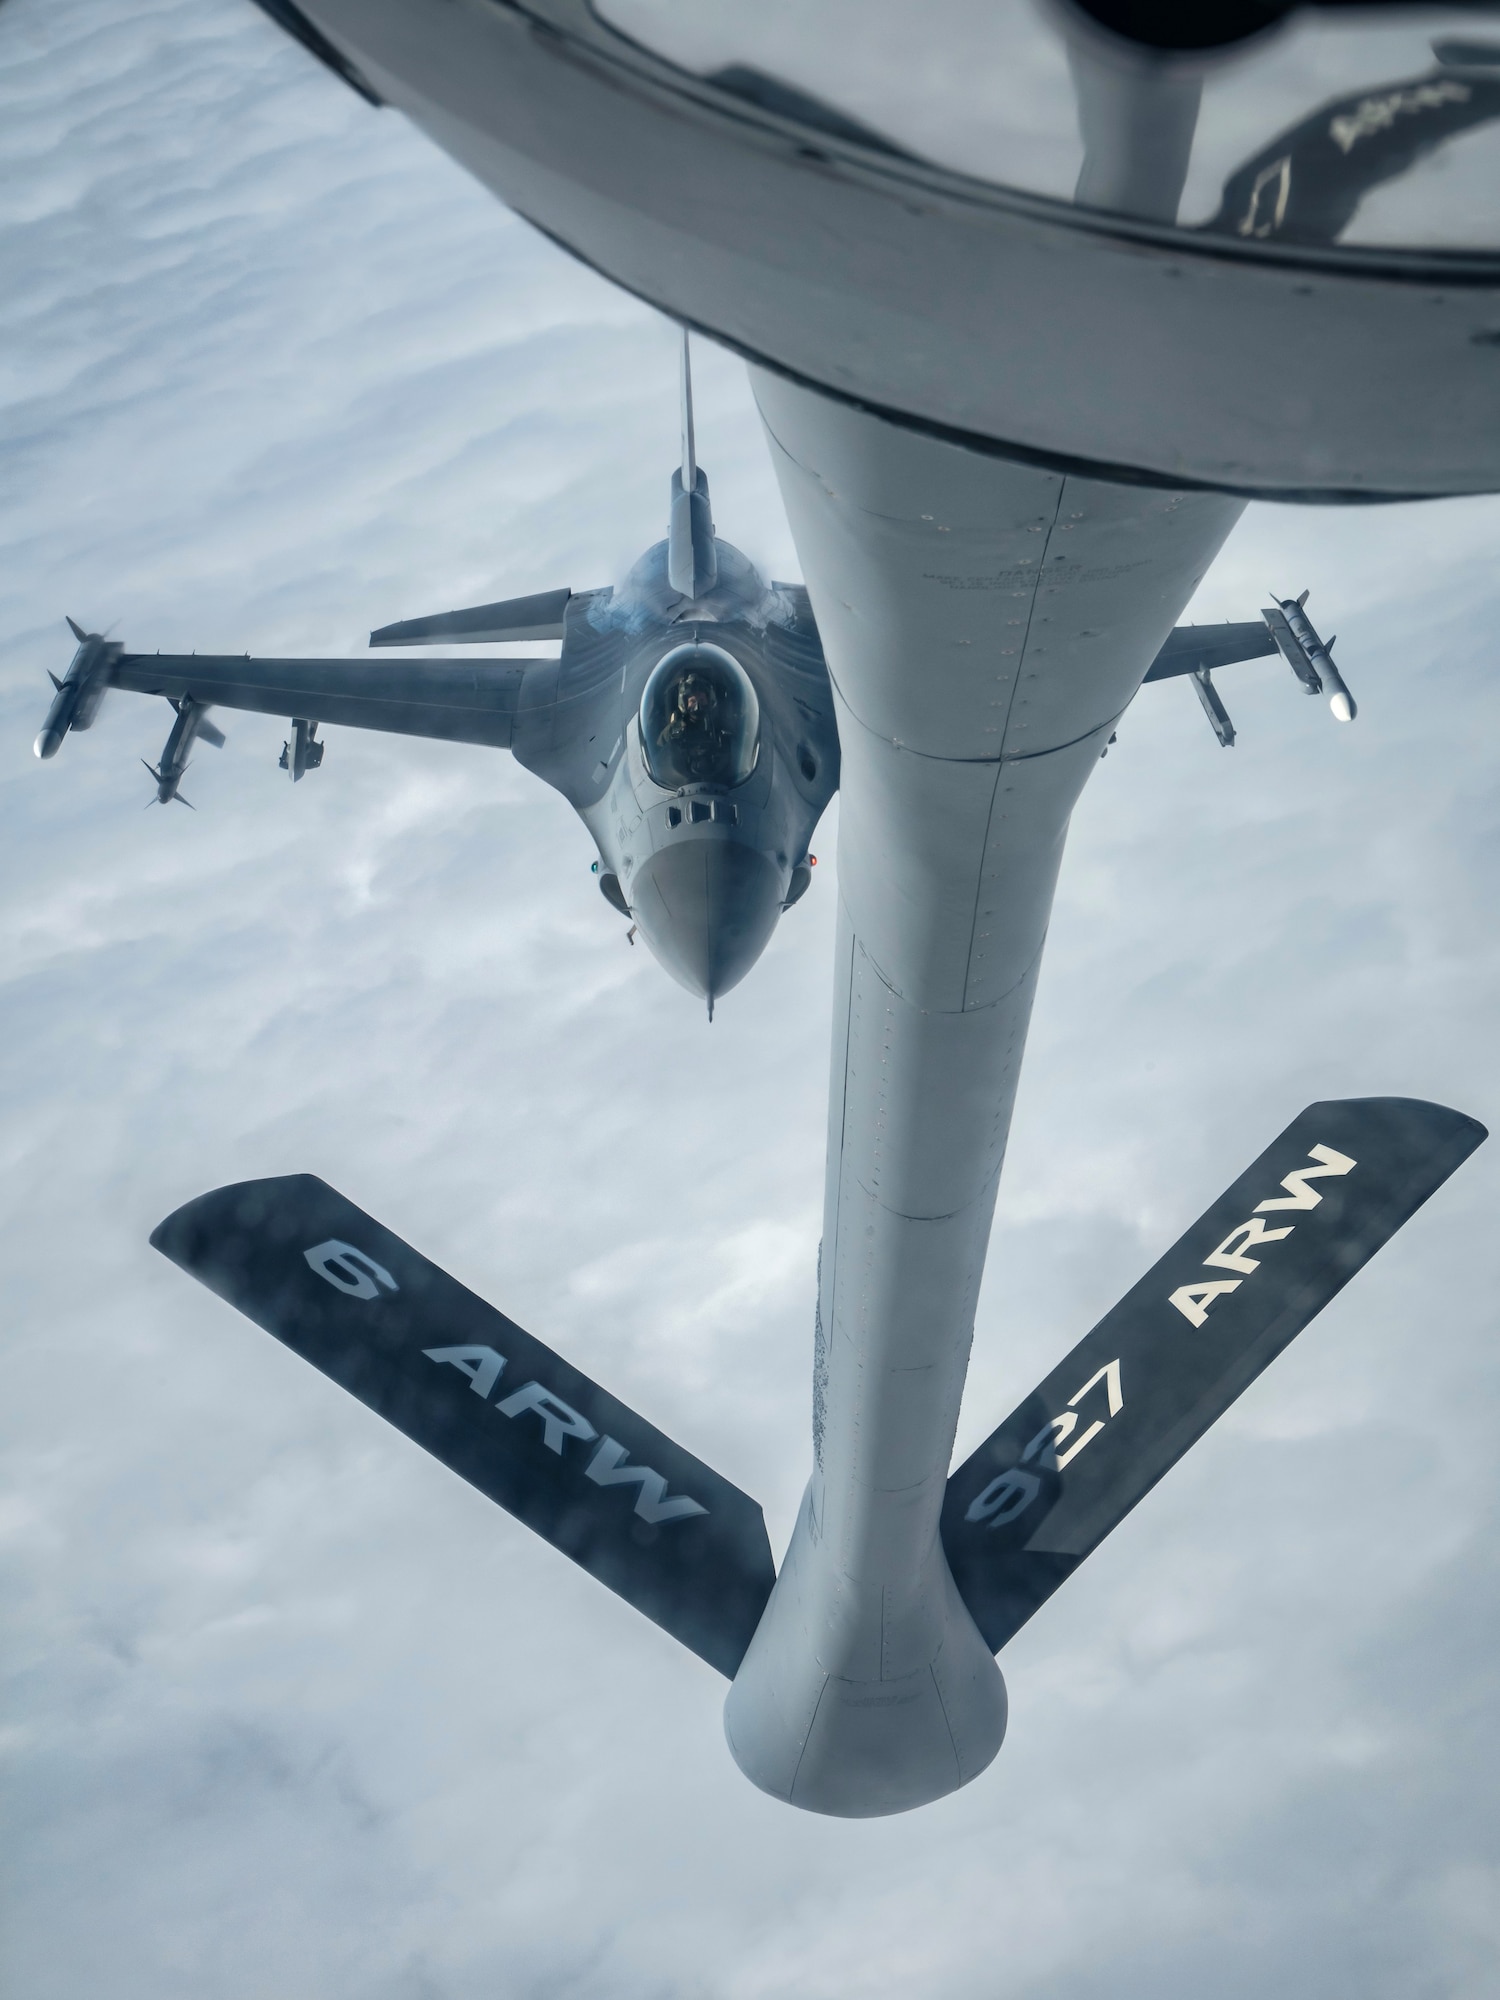 A KC-135 Stratotanker aircraft assigned to MacDill Air Force Base refuels an F-16 Fighting Falcon aircraft assigned to the 187th Fighter Wing, Alabama National Guard, during an exercise over Alabama, Dec. 21, 2021.